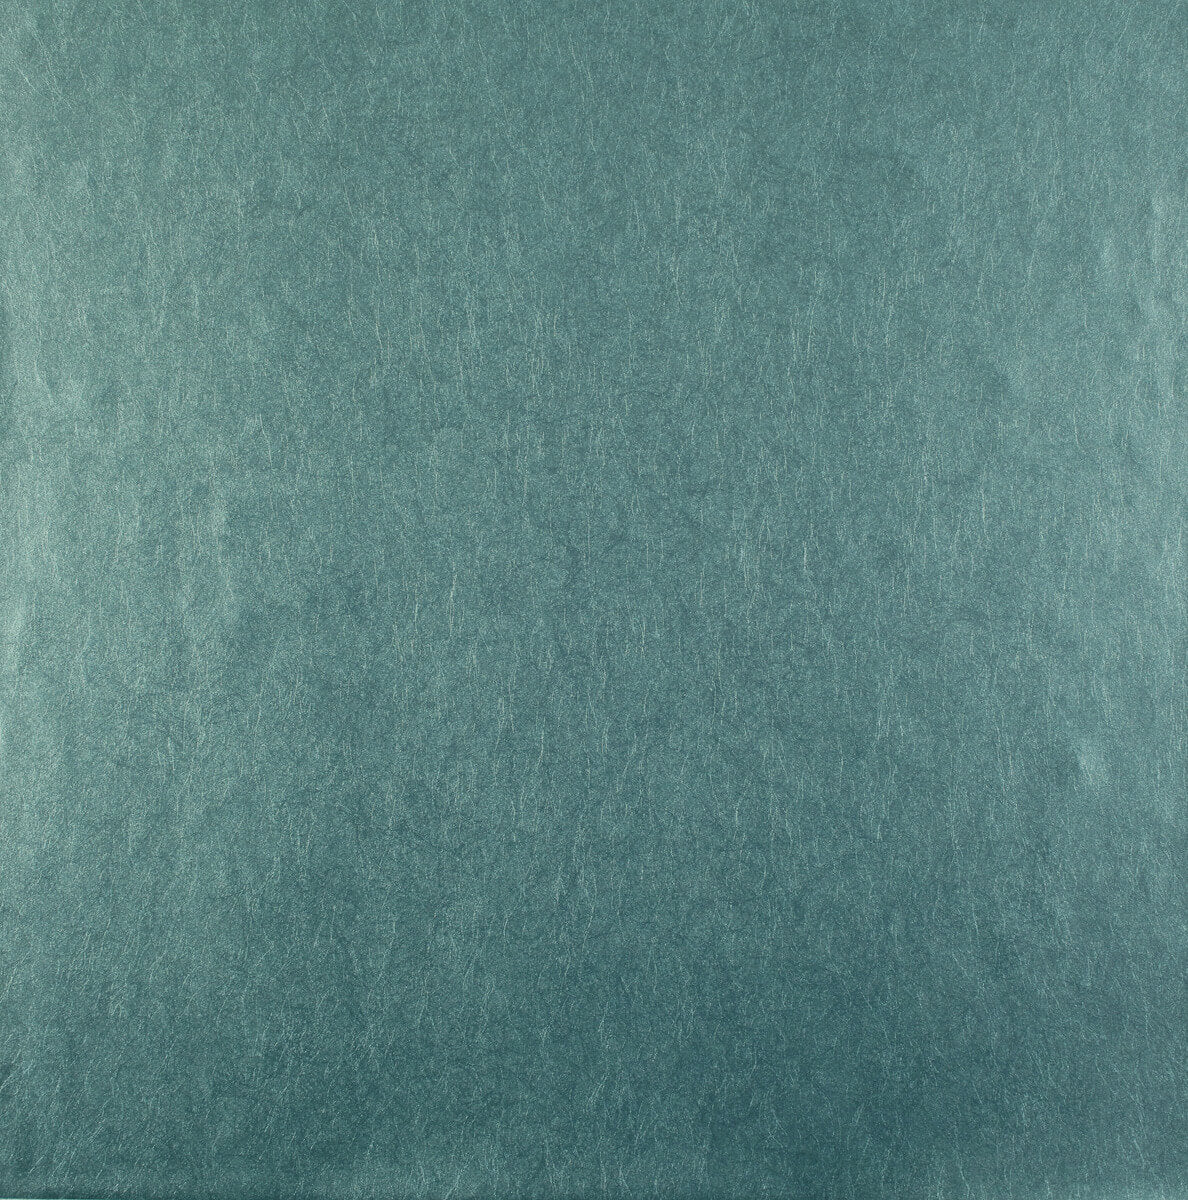 Candice Olson Tranquil Oasis Wallpaper - Dark Teal